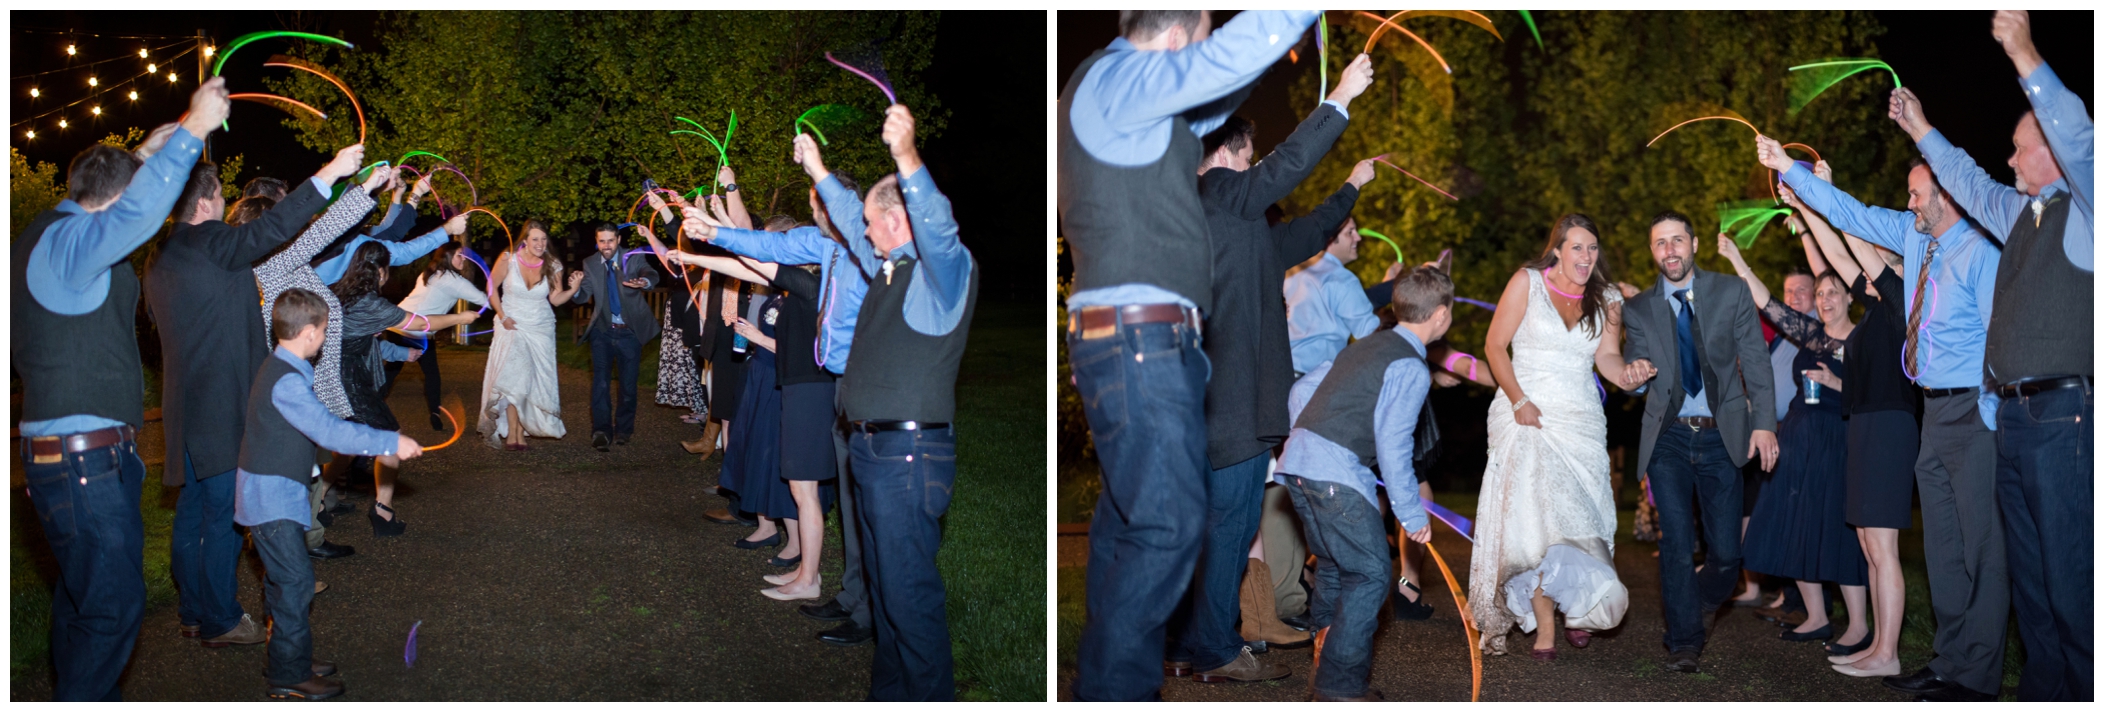 picture of wedding glow stick exit